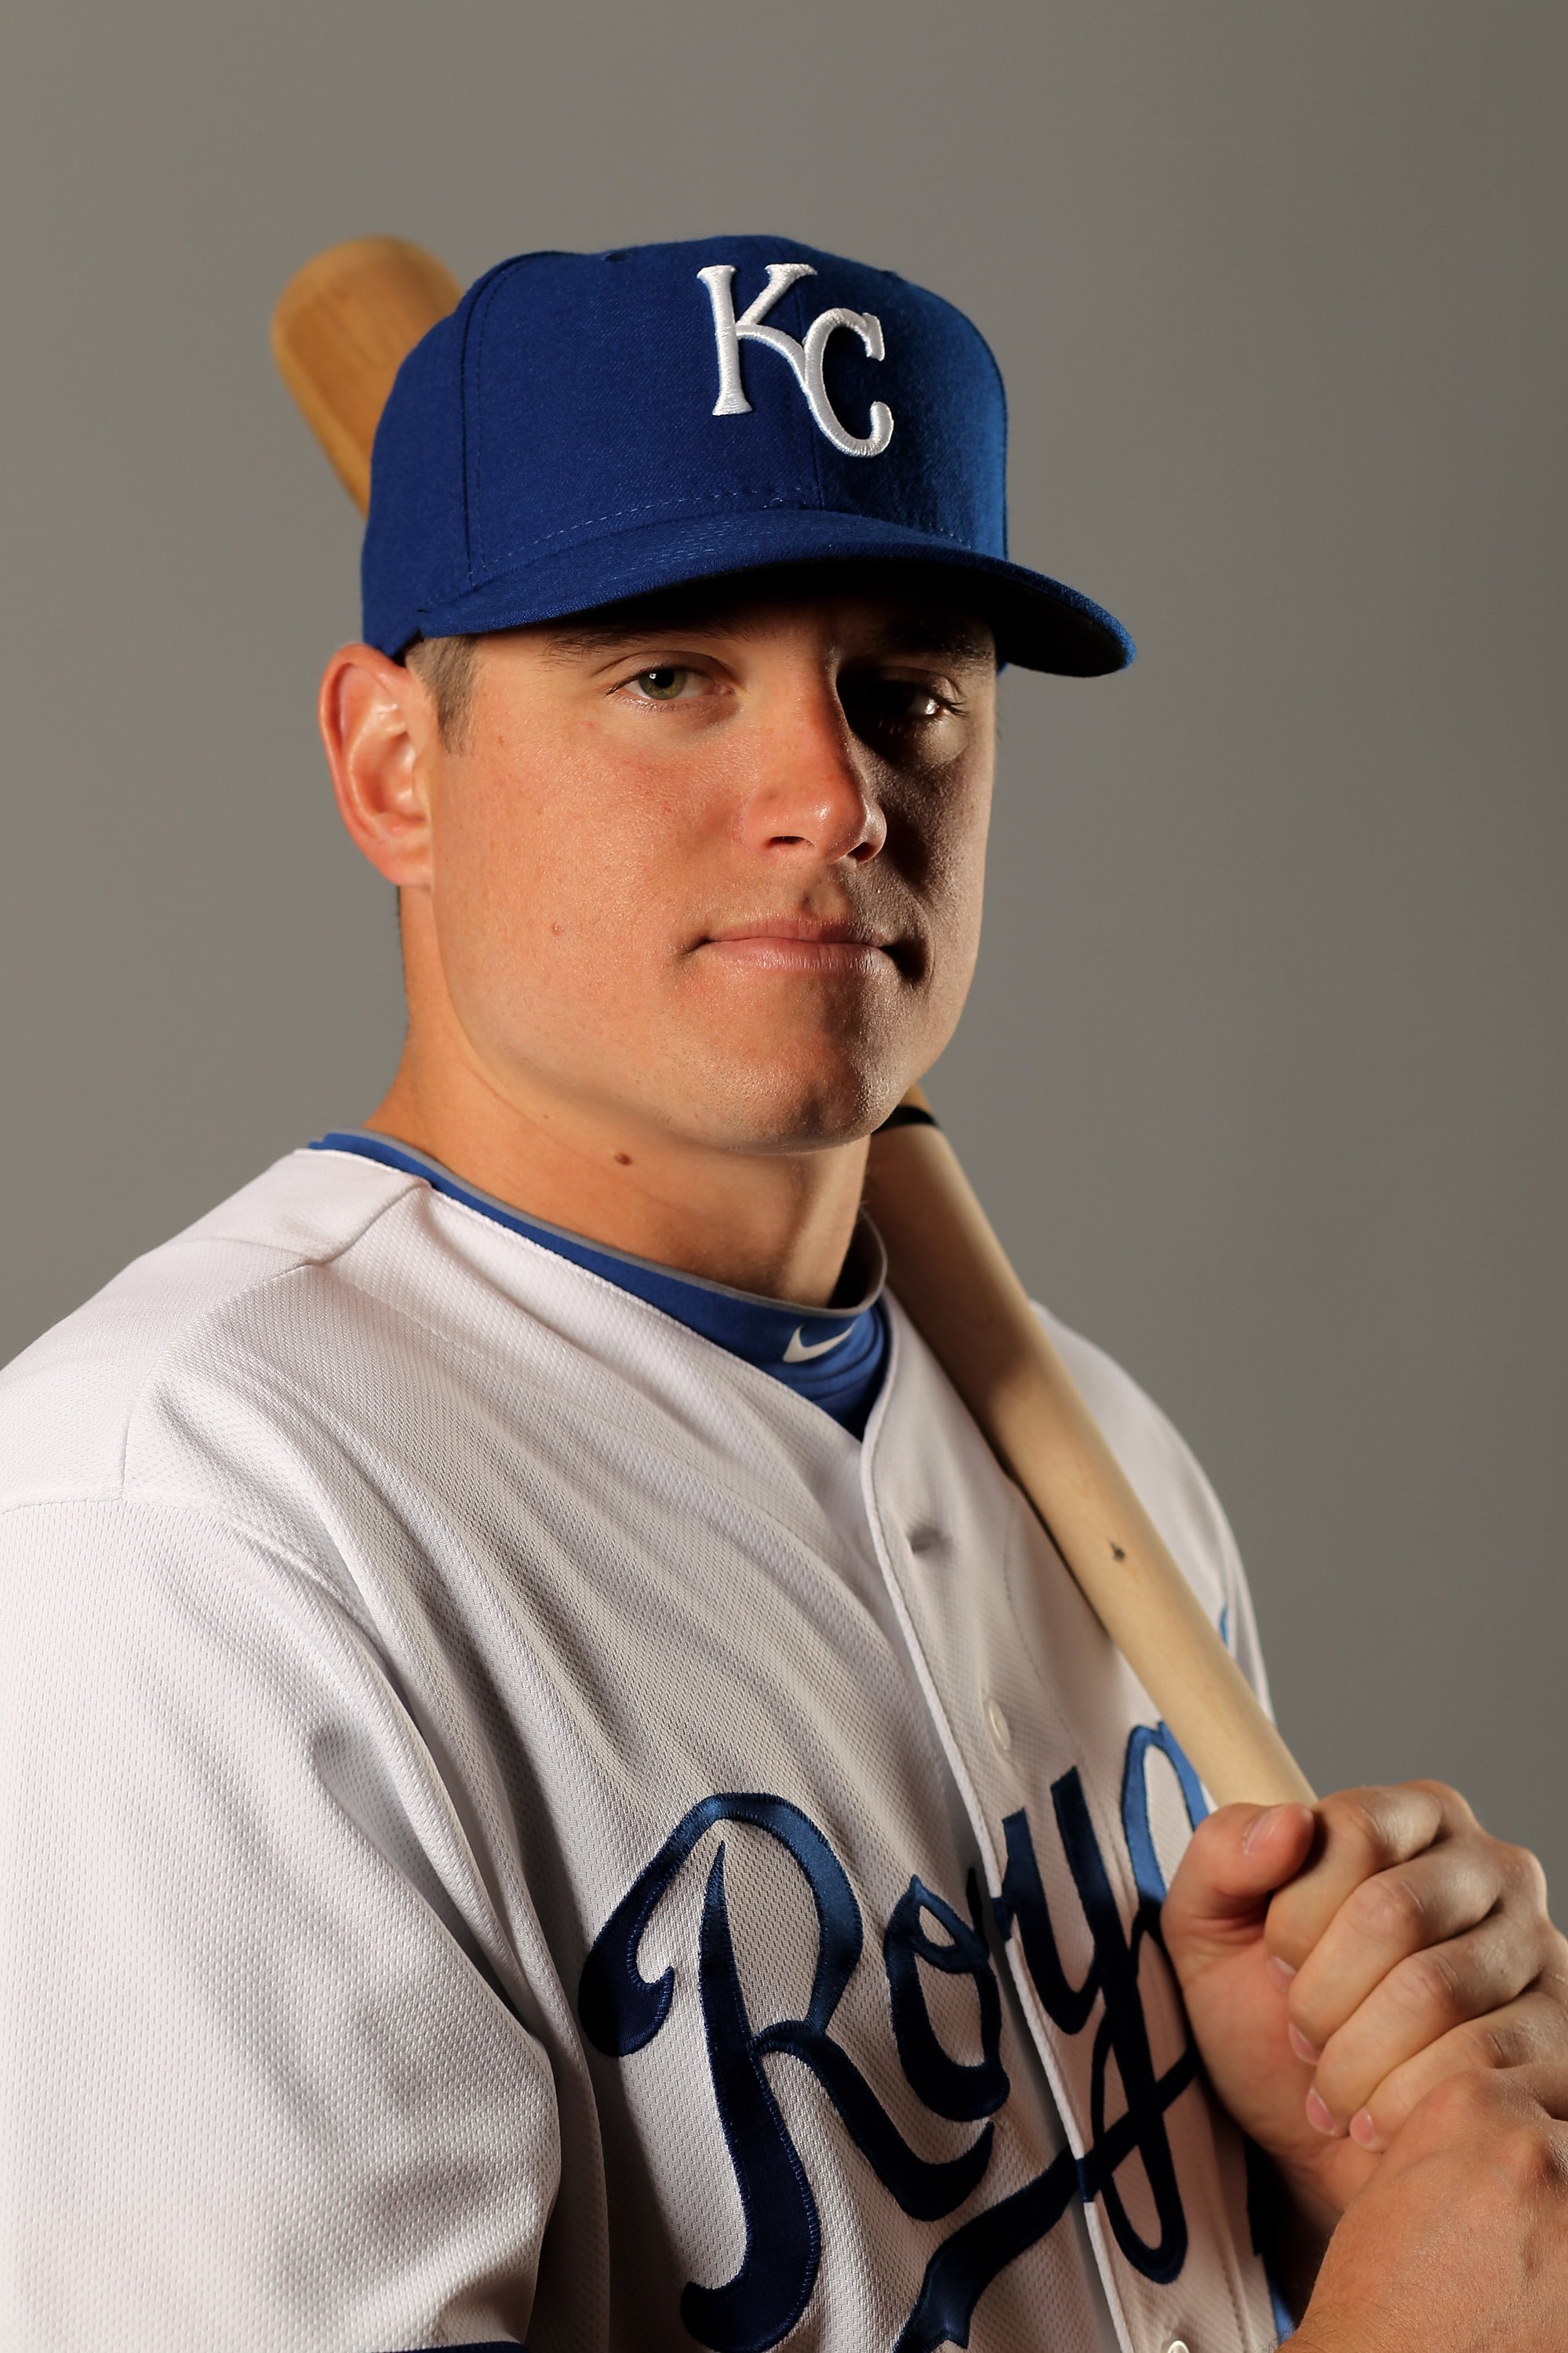 SURPRISE, AZ - FEBRUARY 26:  Mitch Maier of the Kansas City Royals poses during photo media day at the Royals spring training complex on February 26, 2010 in Surprise, Arizona.  (Photo by Ezra Shaw/Getty Images)